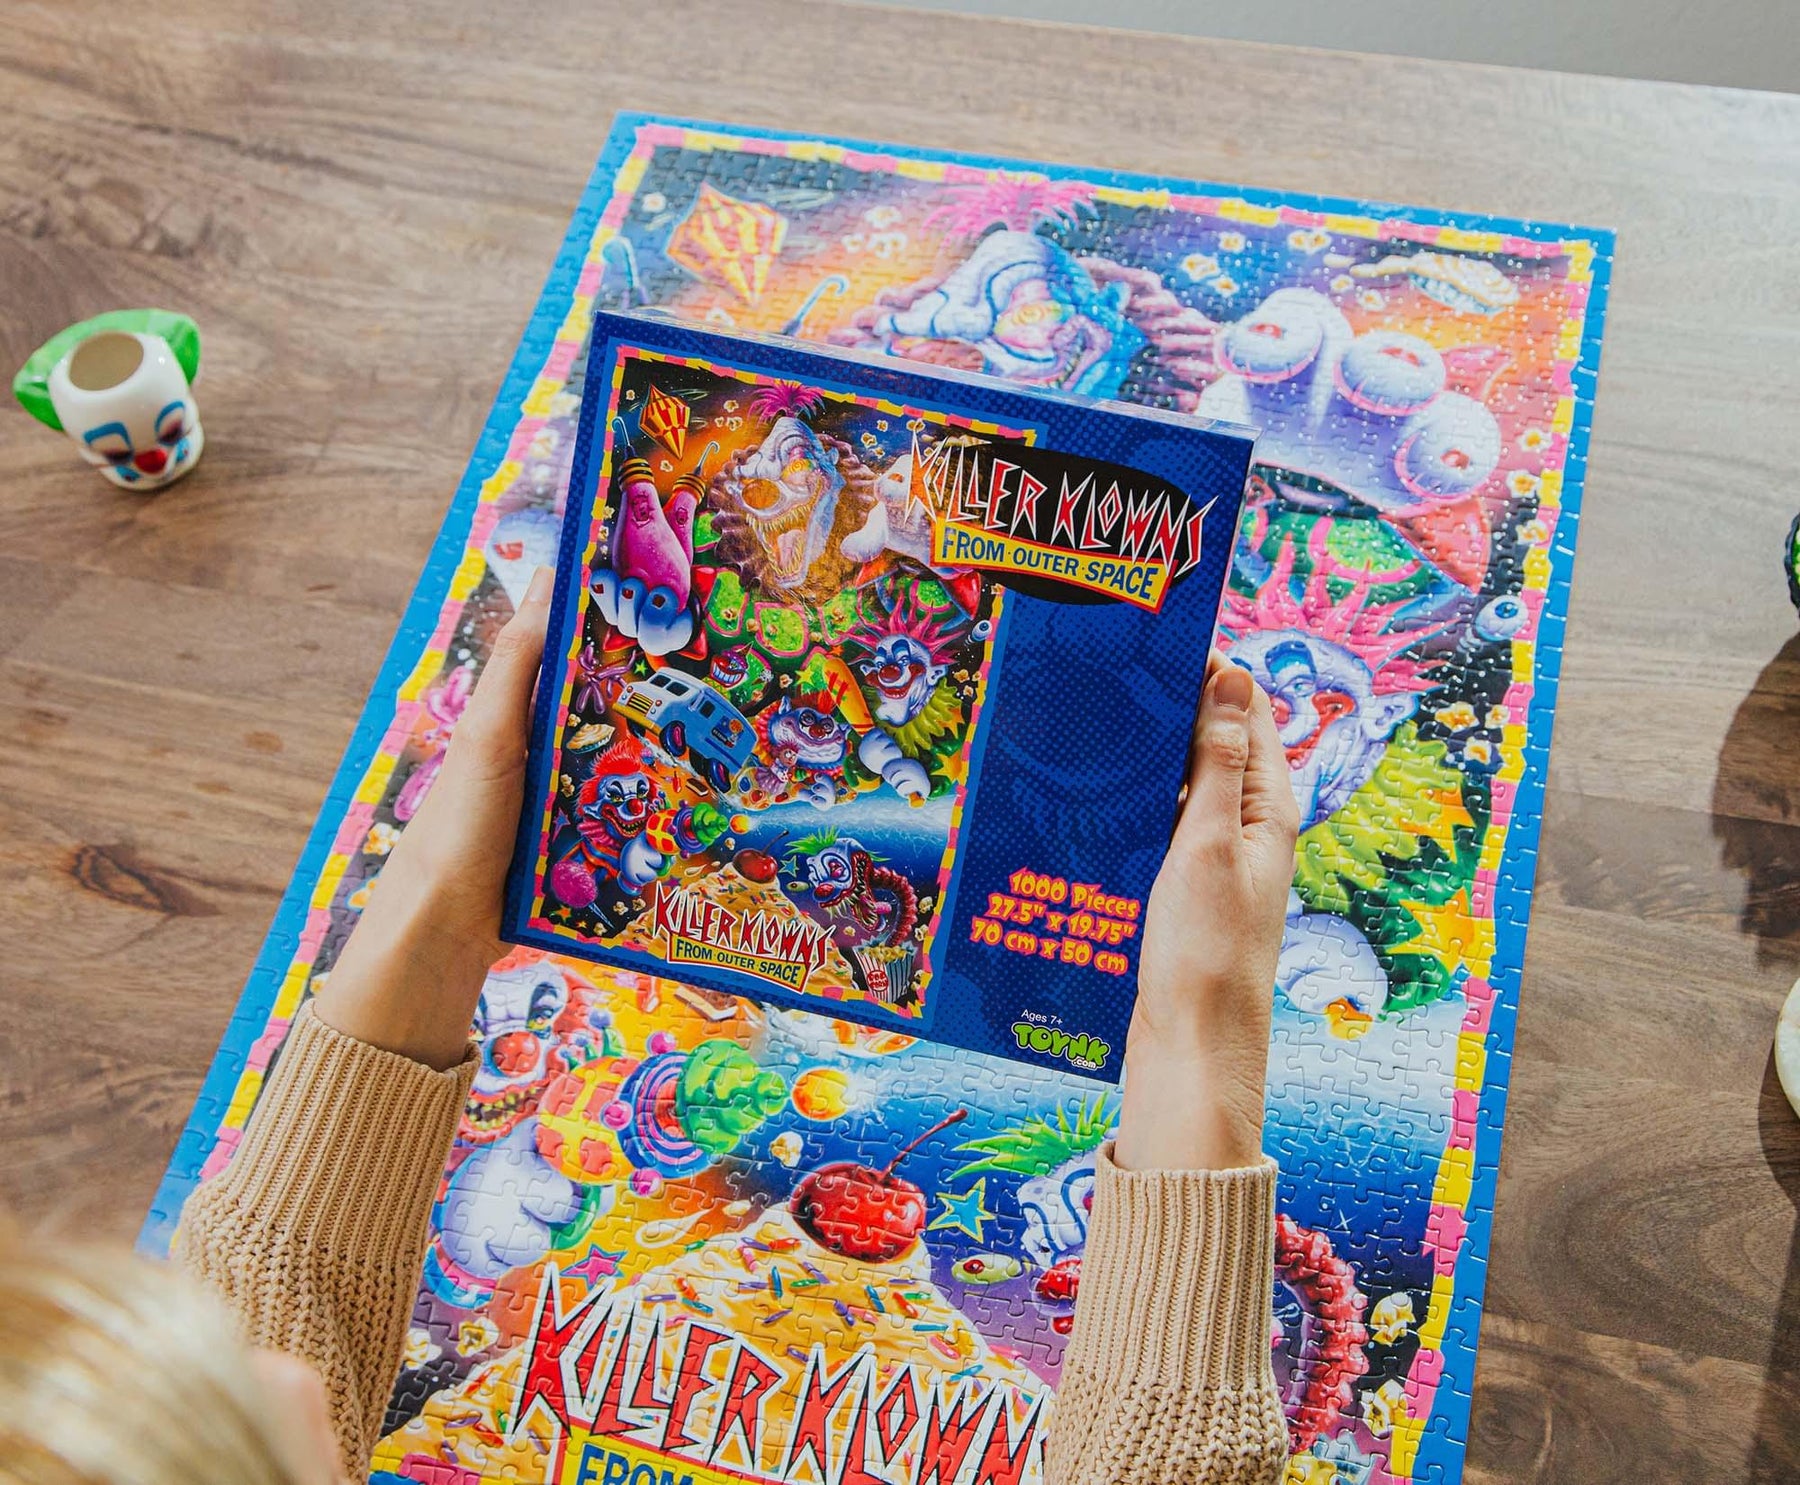 Killer Klowns From Outer Space 1000-Piece Jigsaw Puzzle | Toynk Exclusive